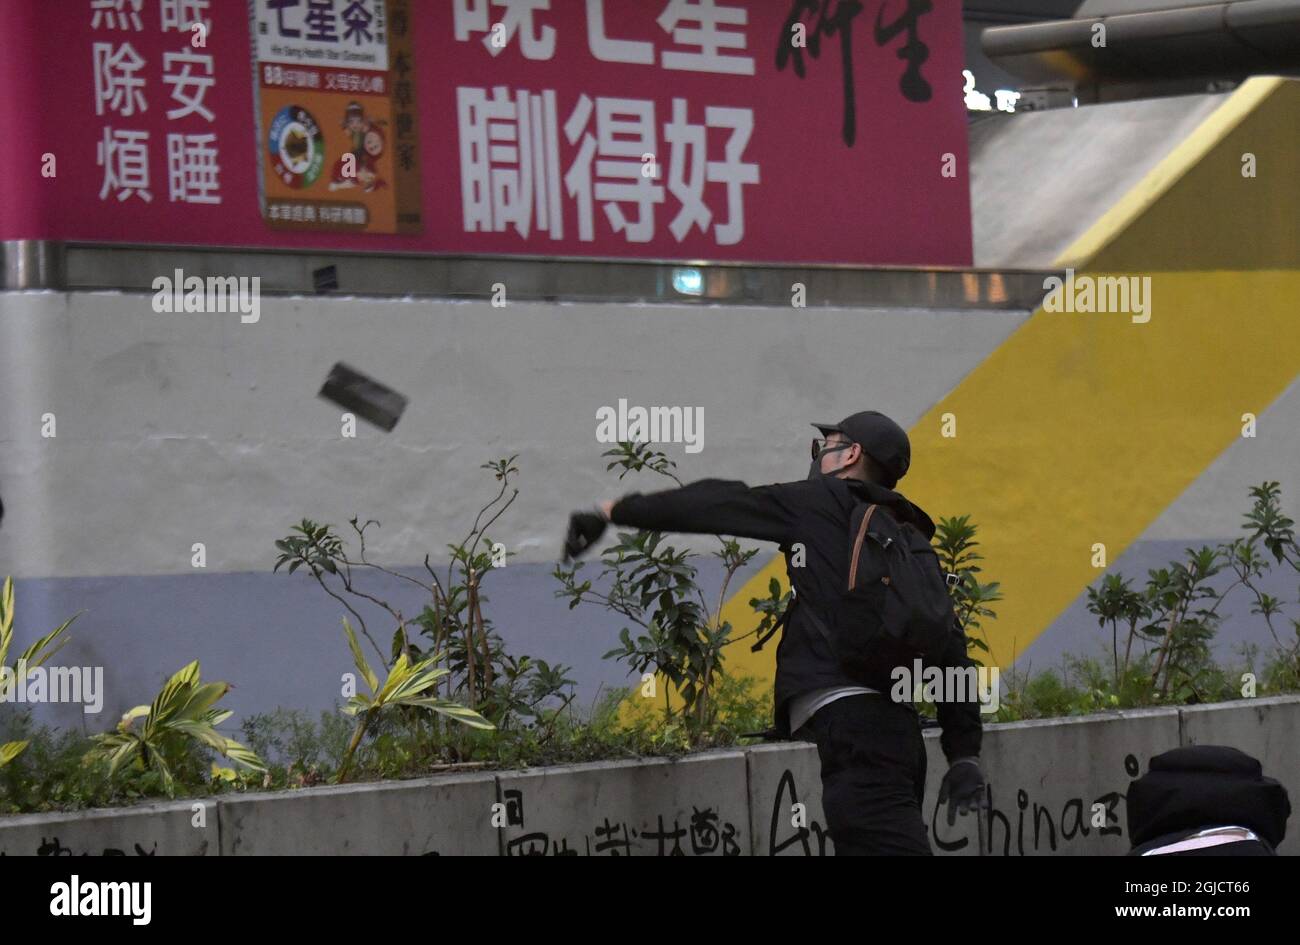 Police is shooting tear gas and protesters / students are throwing bricks, cobble stones and fire bombs during the riots in central Hong Kong in November 2019. Jerker Ivarsson/ Aftonbladet / TT code 2512 AFTONBLADET / 2826  Stock Photo